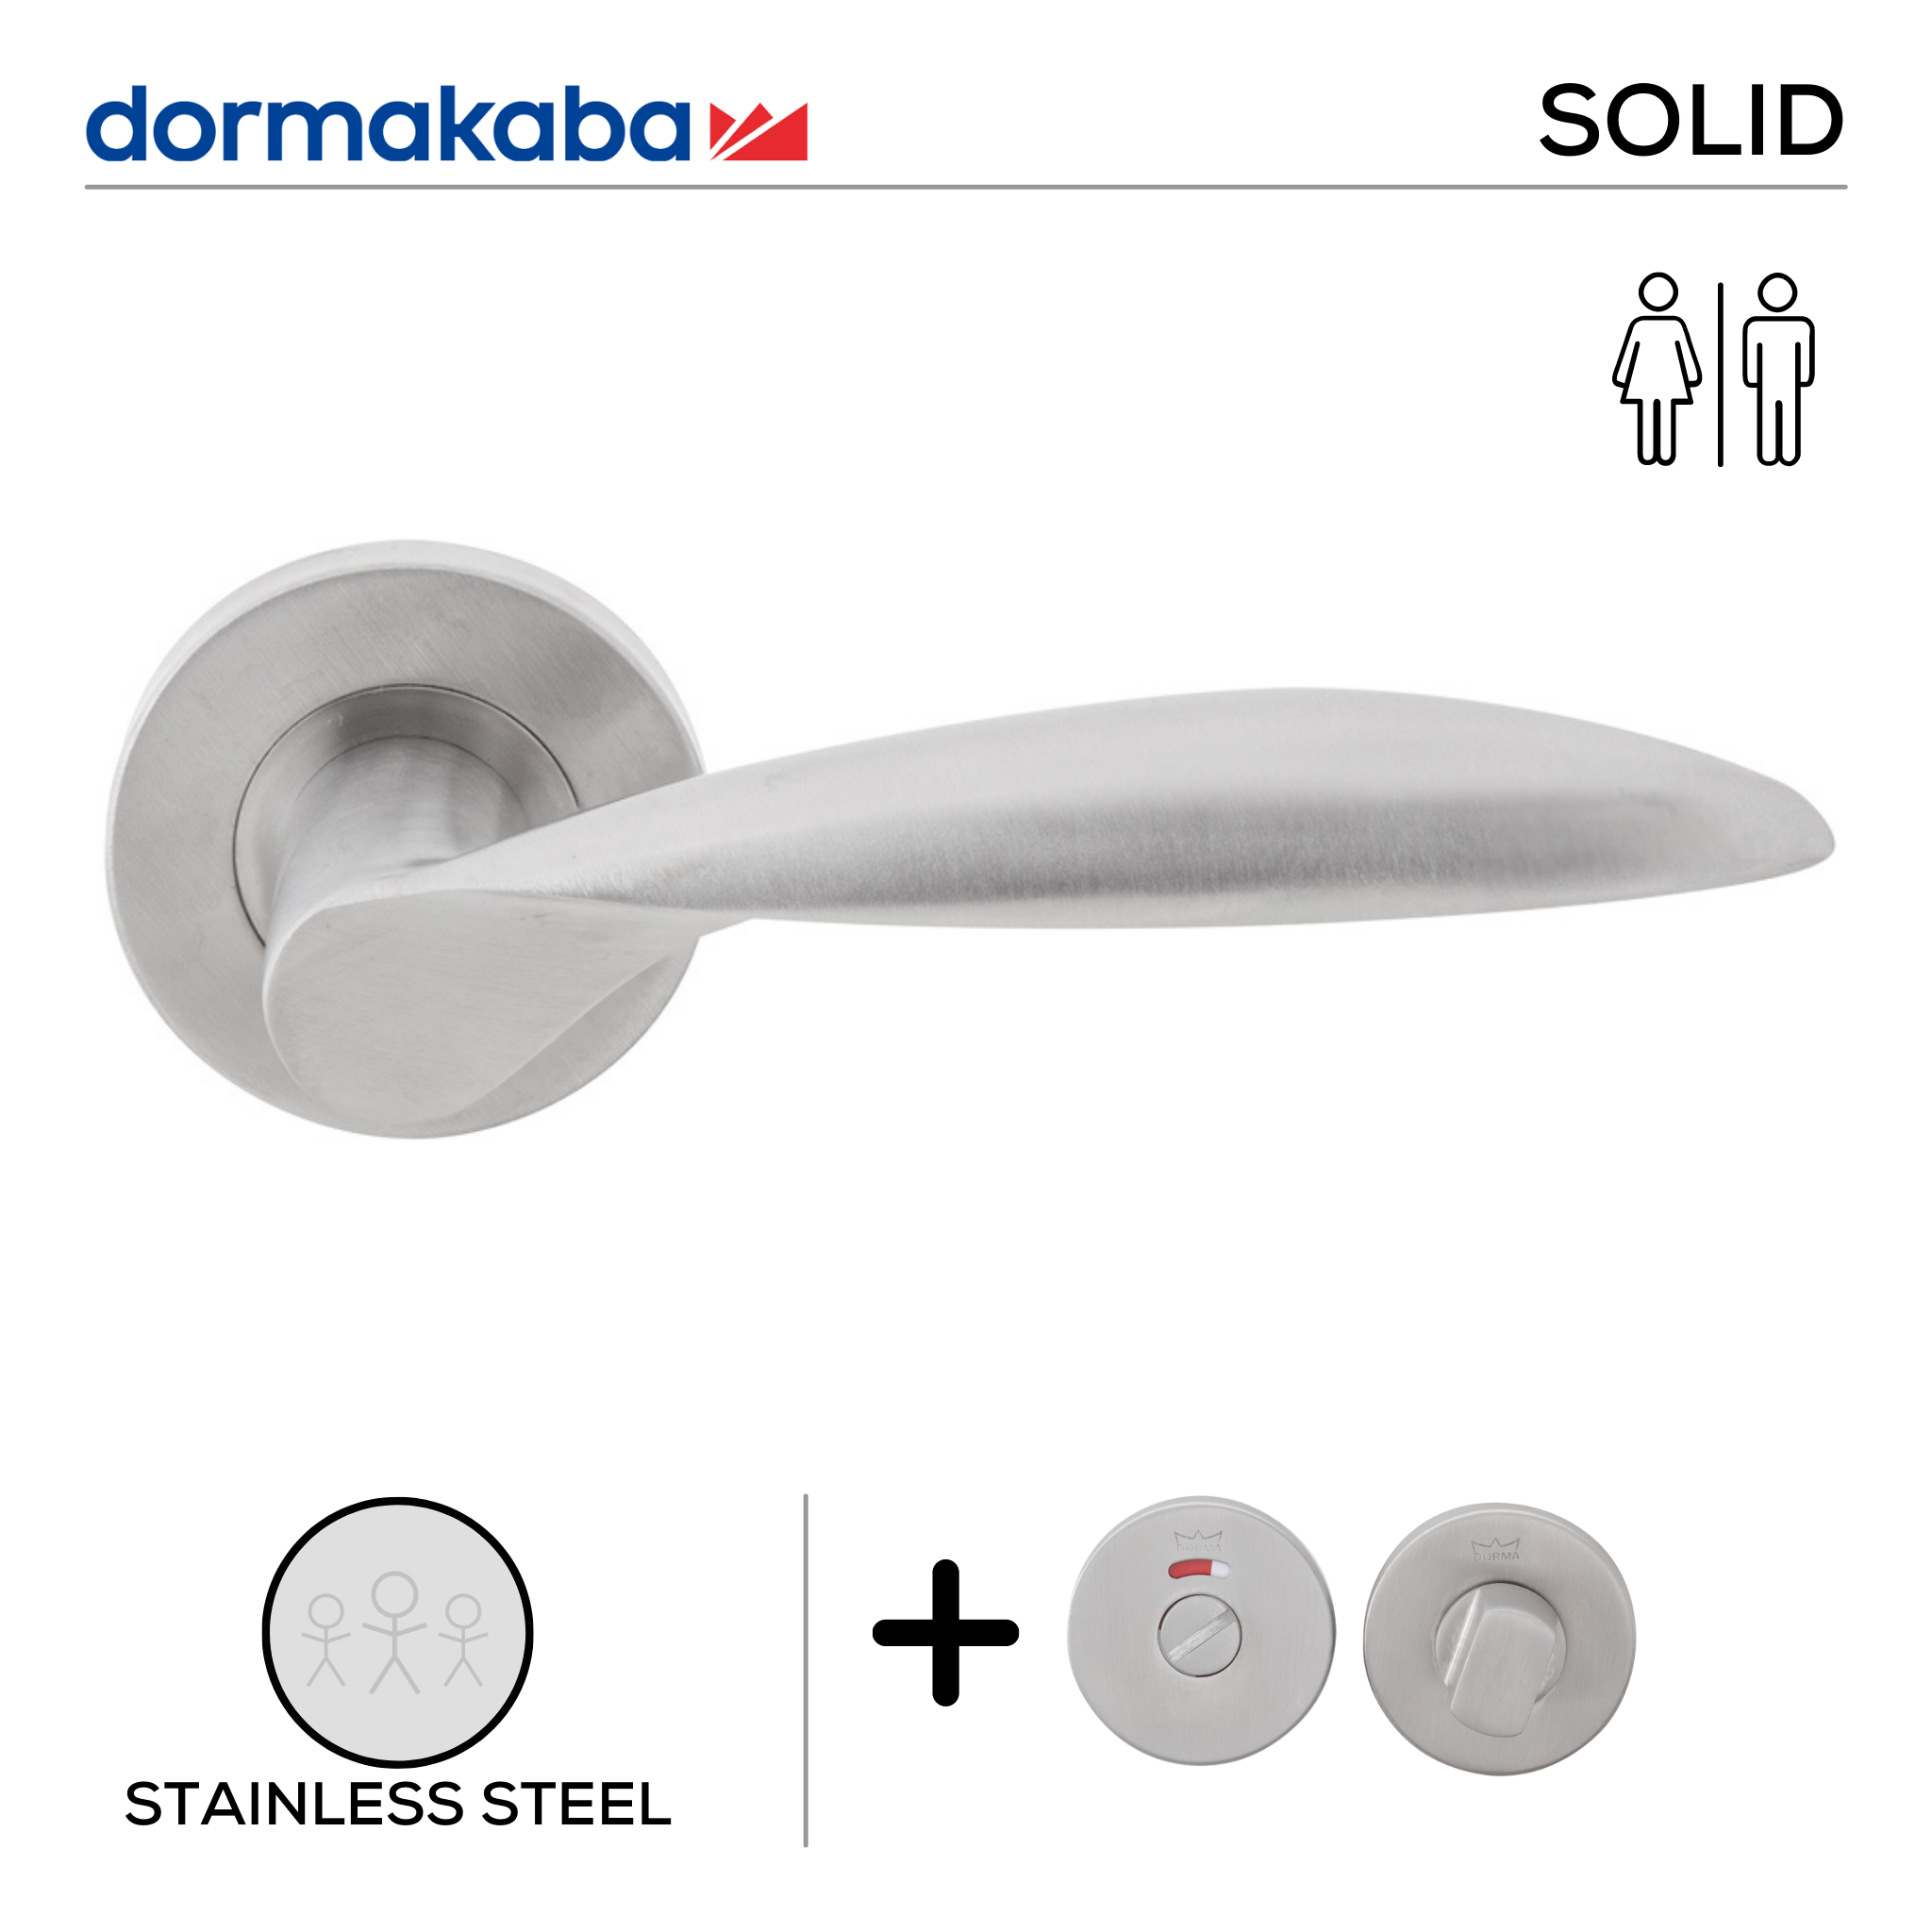 SH 811 Bathroom W/C, Lever Handles, Solid, On Round Rose, With Bathroom (WC) Indicator Set - DWC 005, 143mm (l), Stainless Steel, DORMAKABA